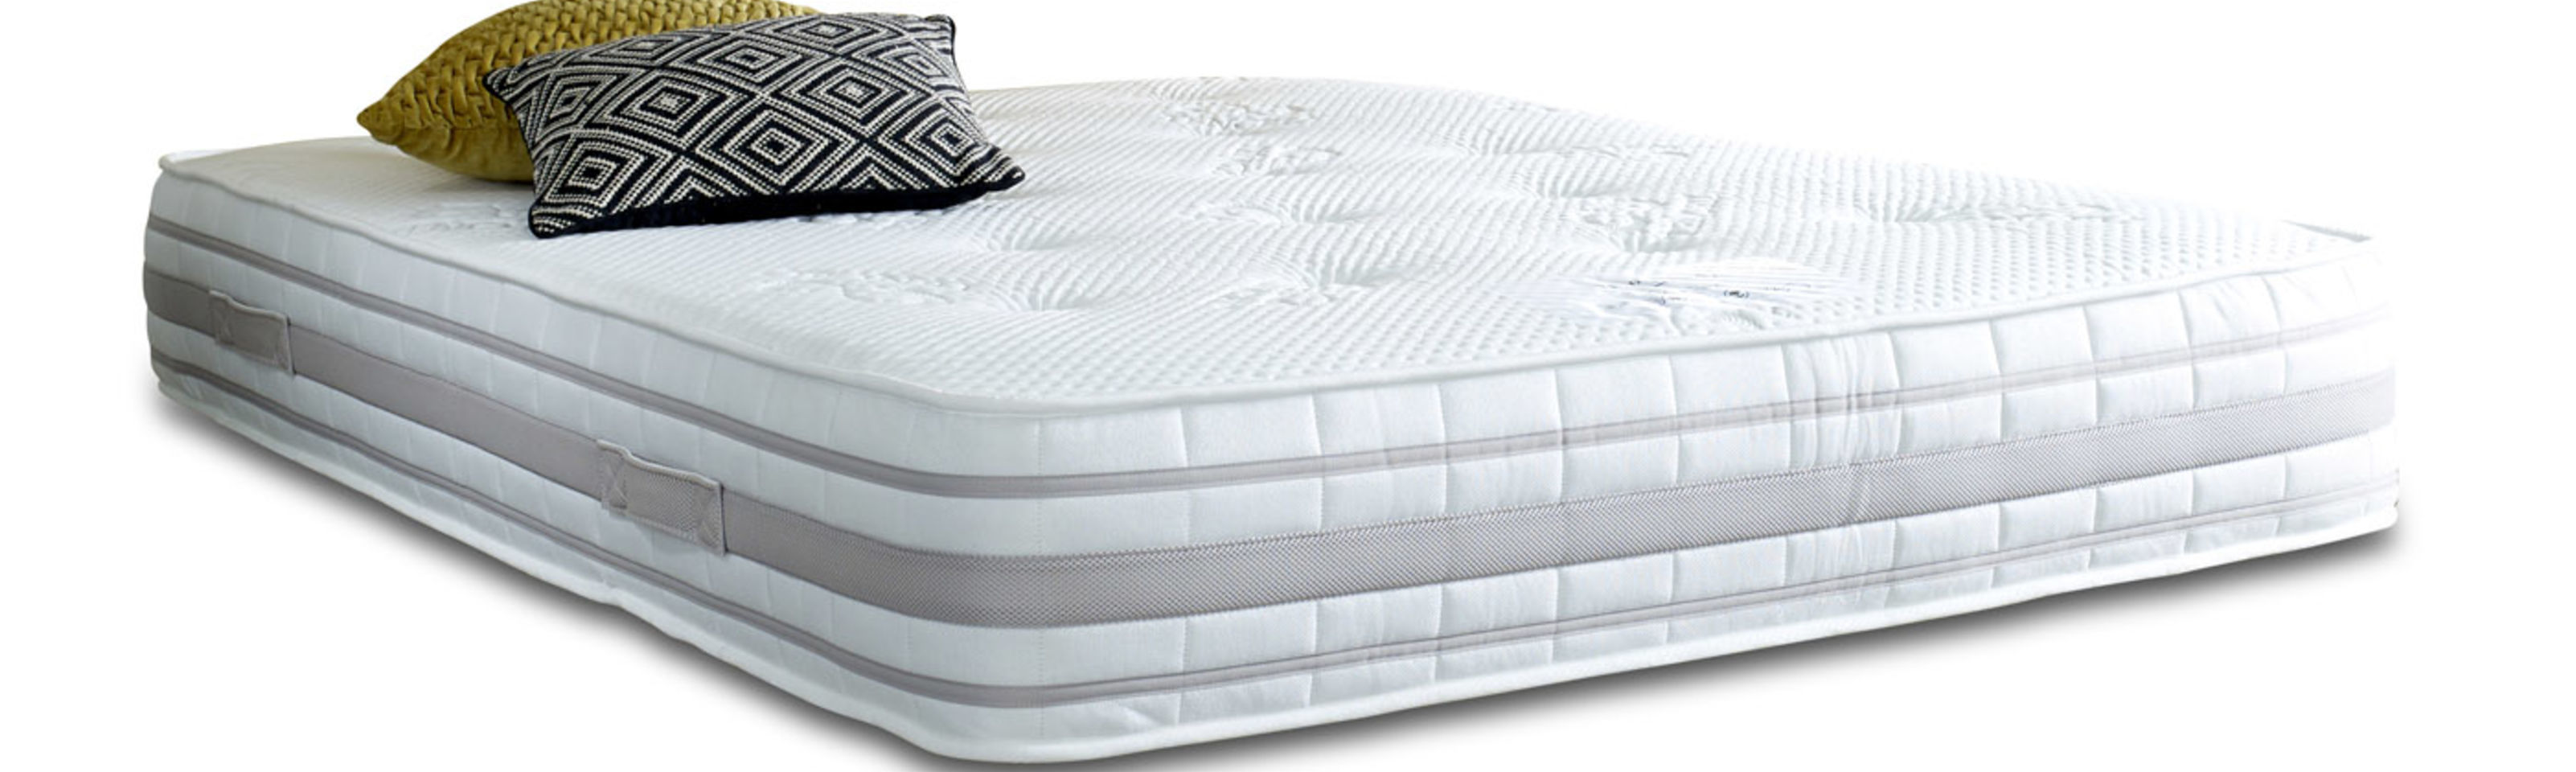 Pocket Sprung Mattresses - What you need to know